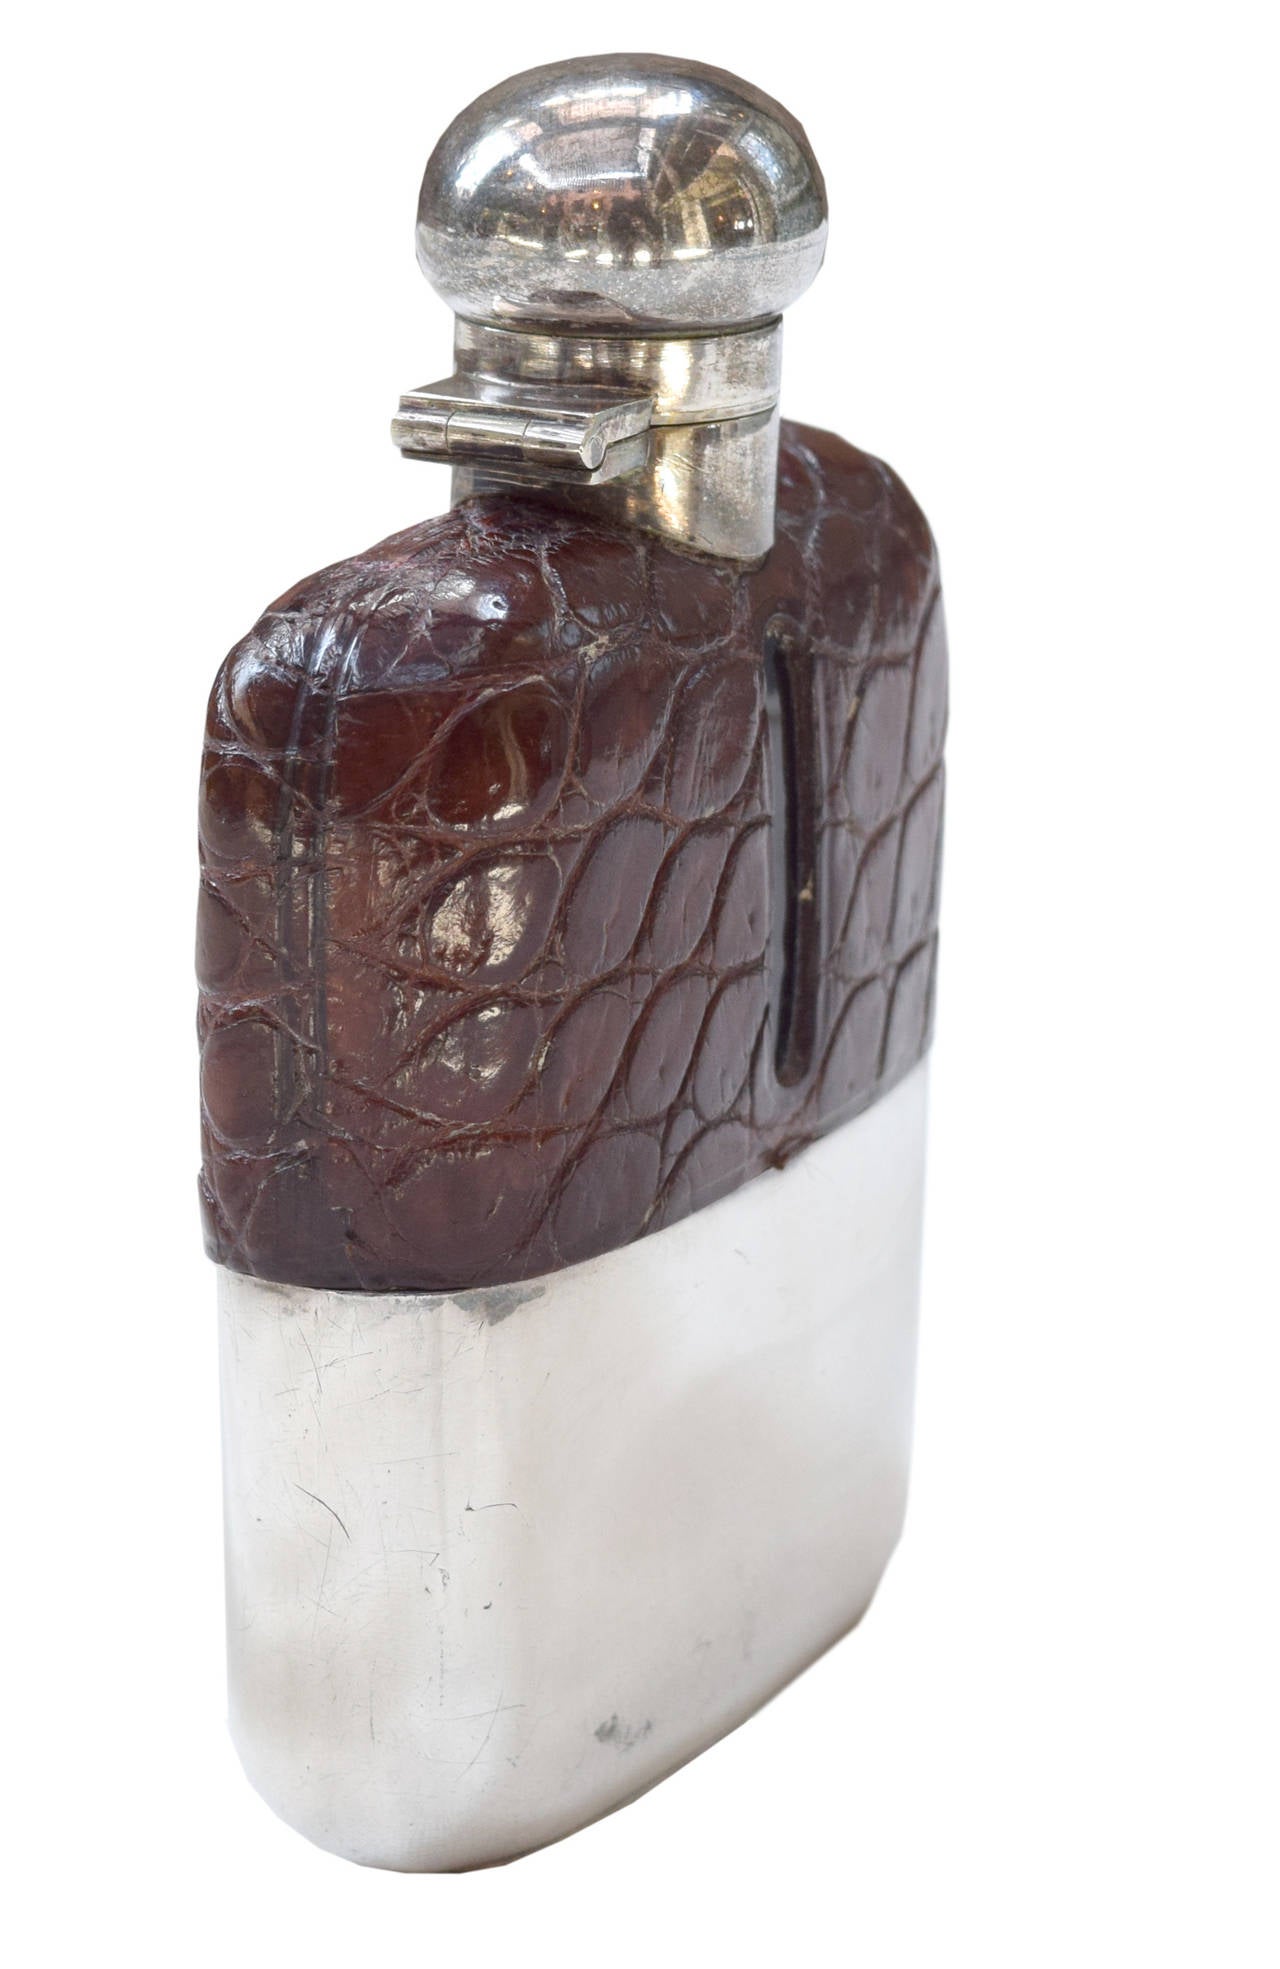 A stamped leather and silver hip flask with a removable drinking cup and bayonet style cap, from Henry A Murton, New Castle on Tyne, circa 1894.